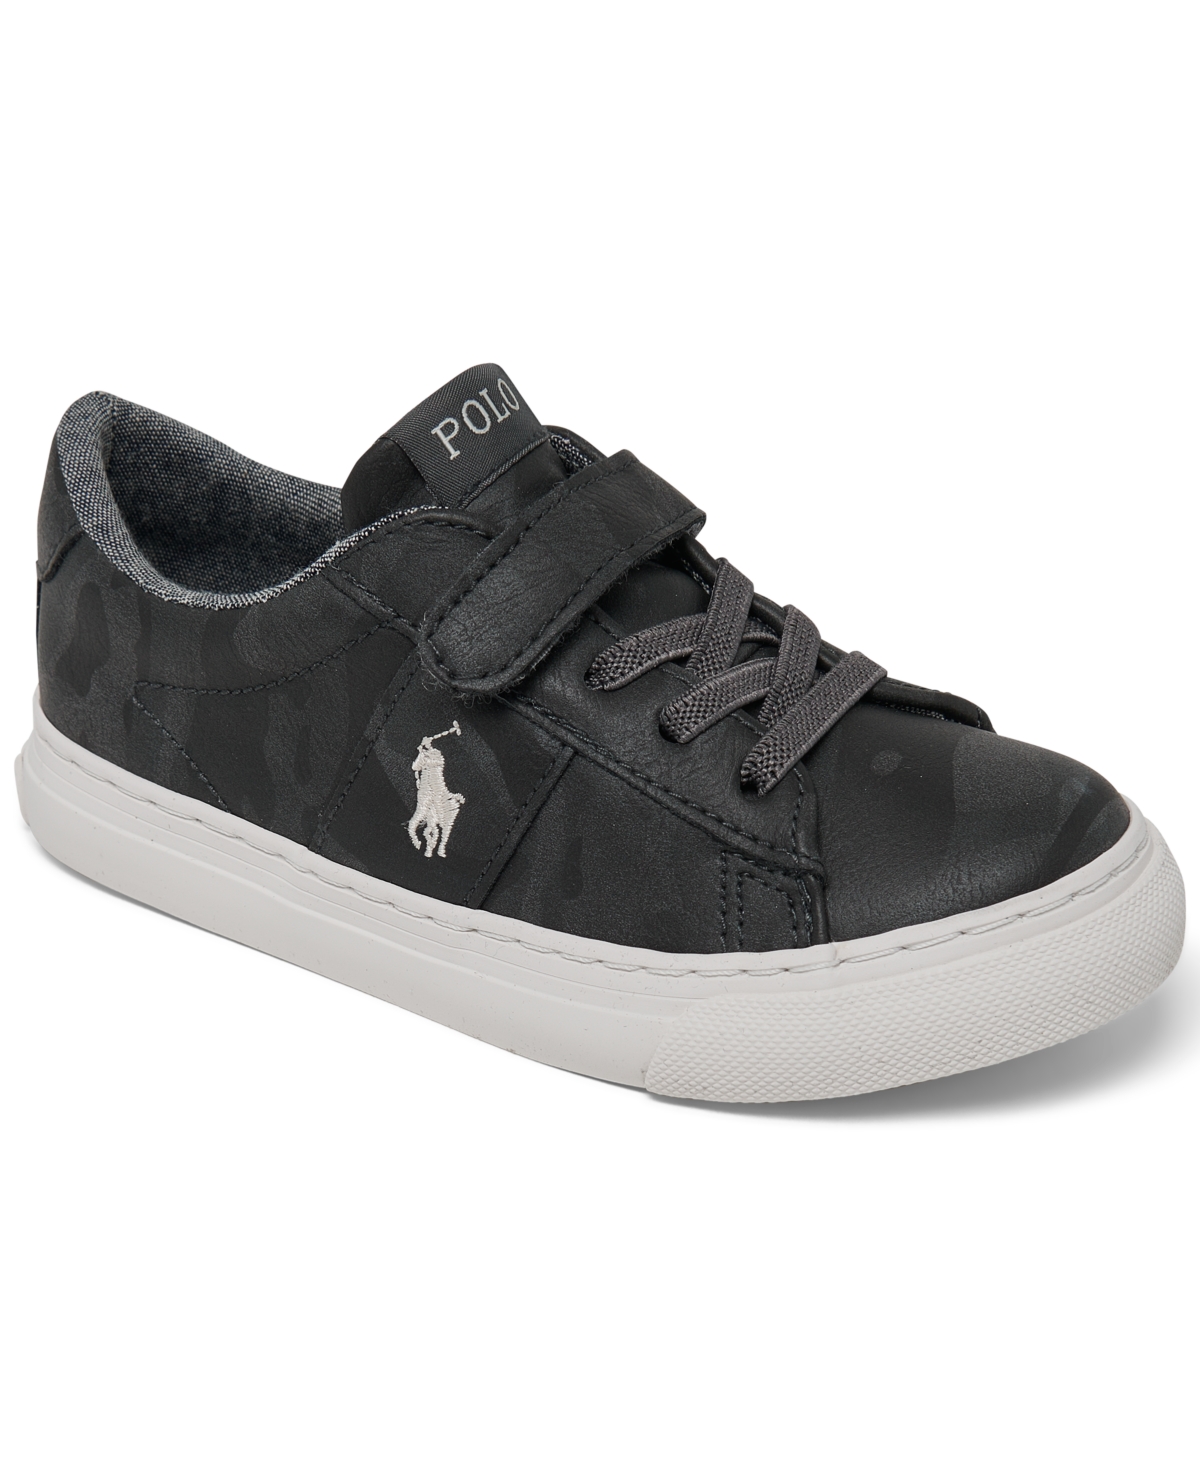 POLO RALPH LAUREN TODDLER KIDS SAYER ADJUSTABLE STRAP CLOSURE CASUAL SNEAKERS FROM FINISH LINE